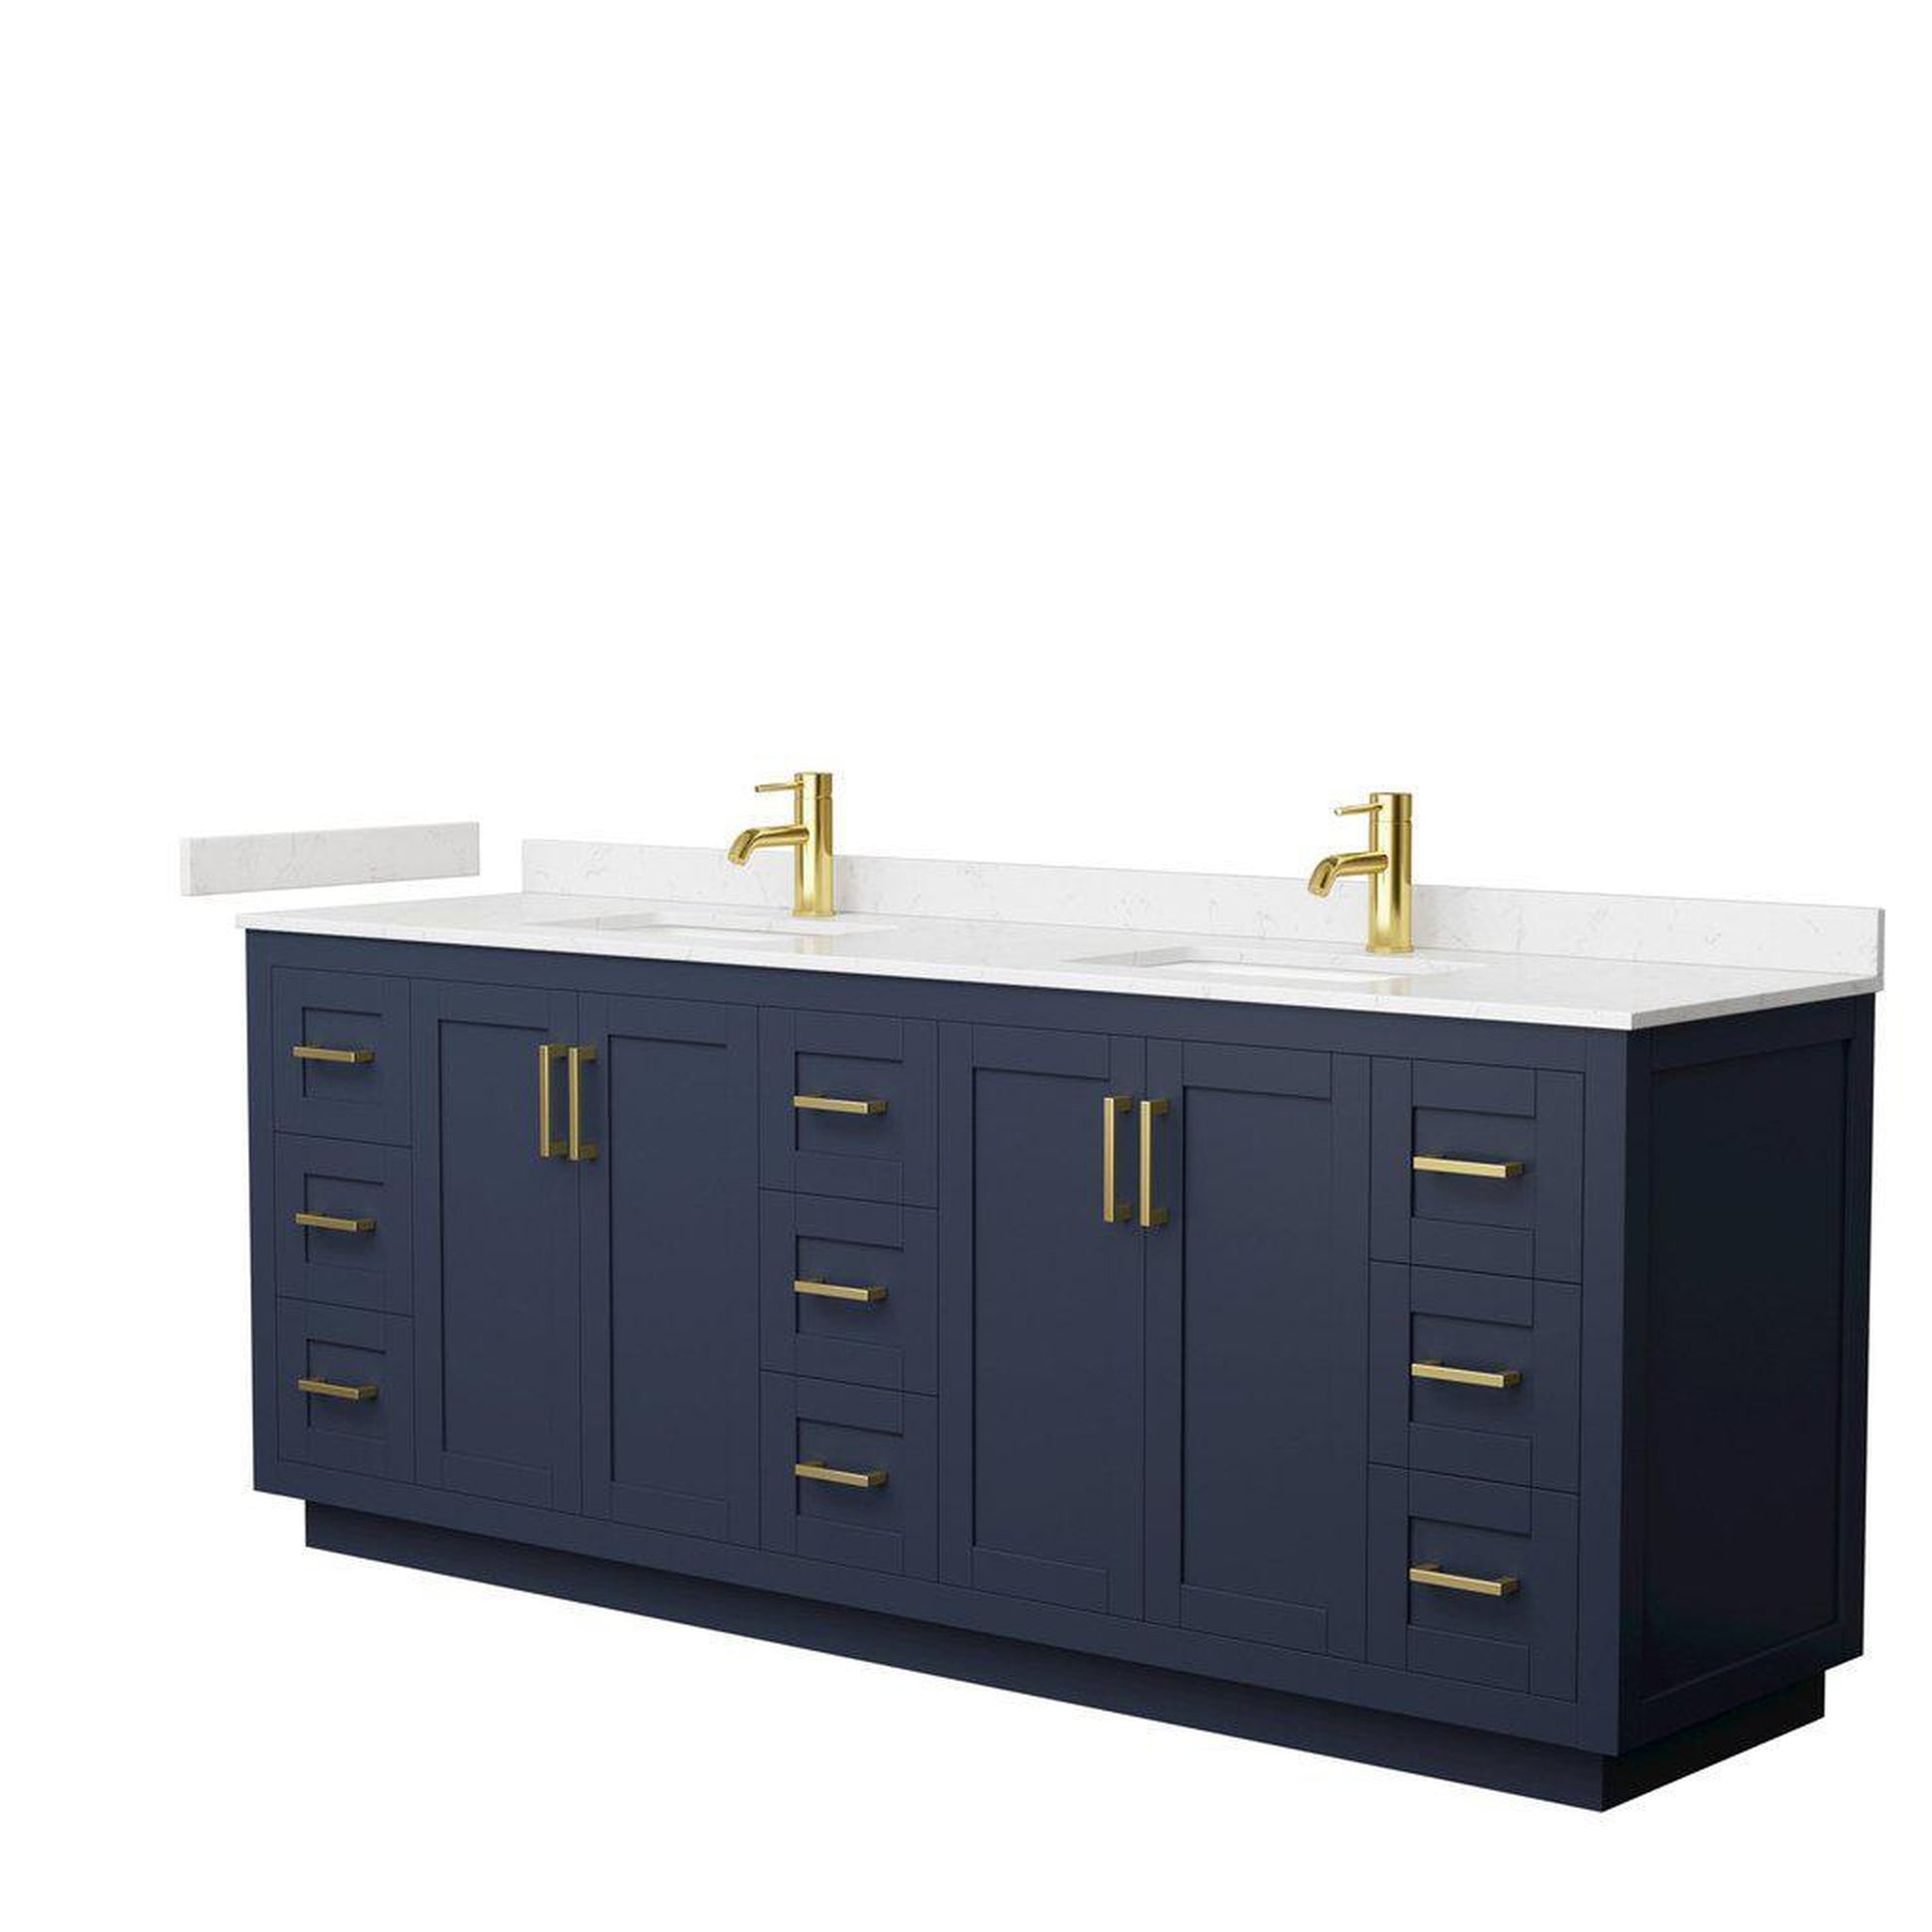 Wyndham Collection Miranda 84" Double Bathroom Dark Blue Vanity Set With Light-Vein Carrara Cultured Marble Countertop, Undermount Square Sink, And Brushed Gold Trim